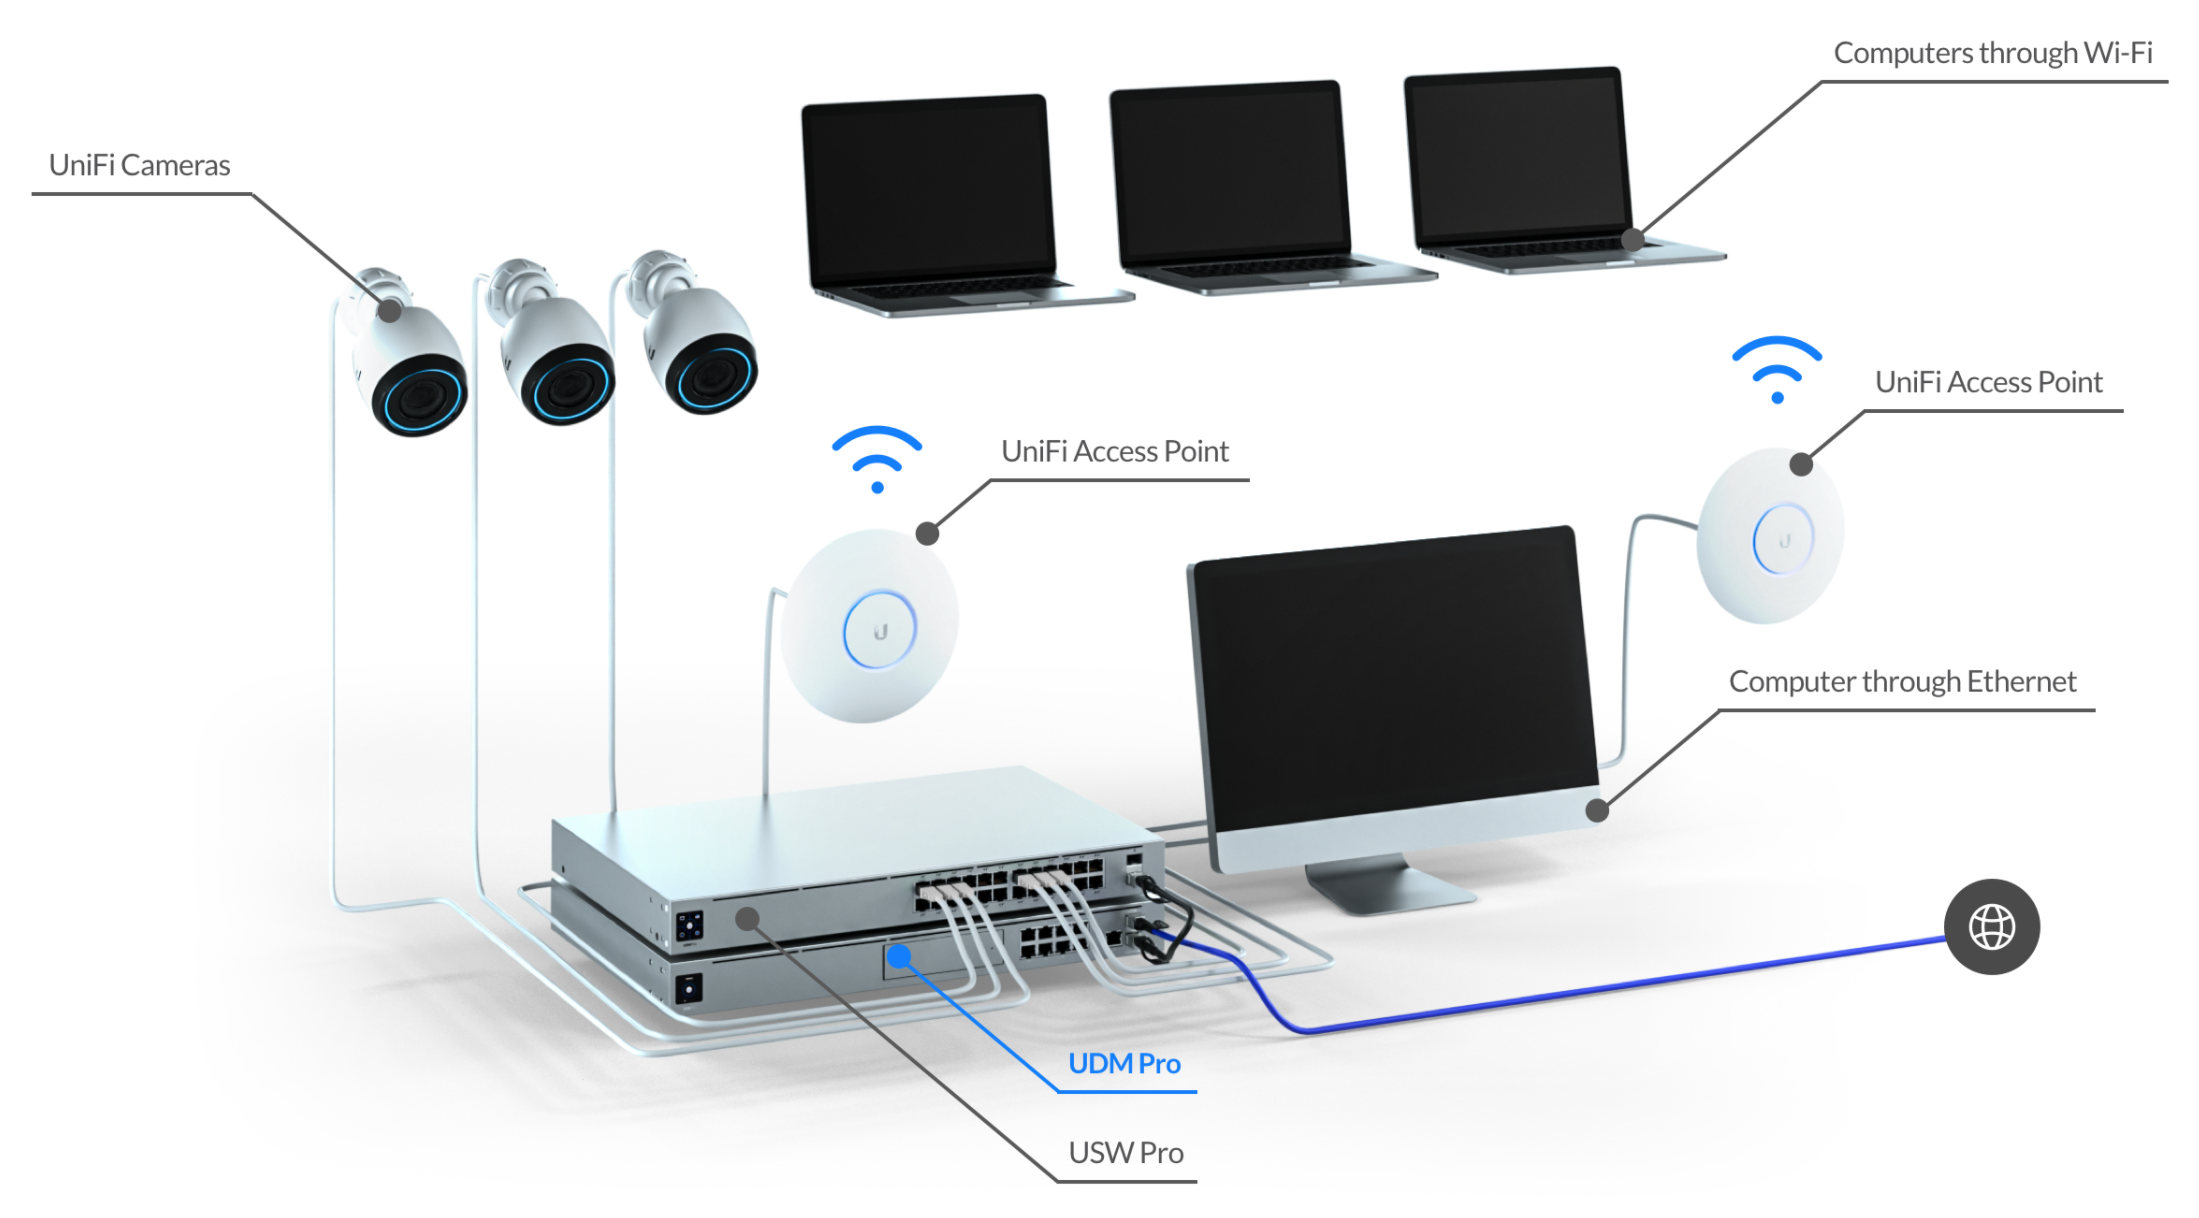 Unifi Network Overview